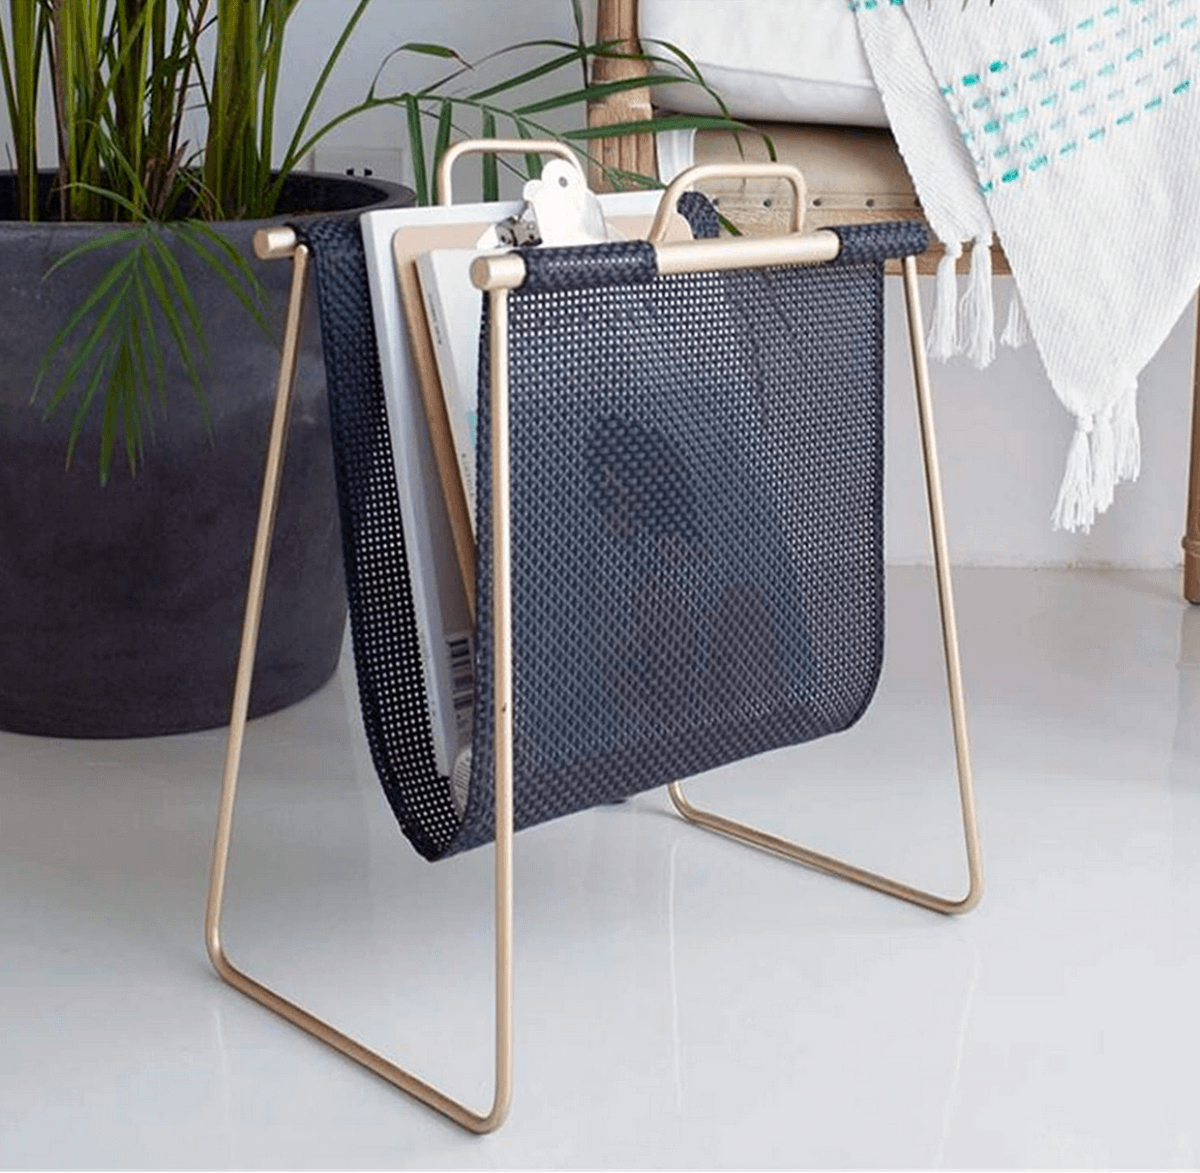 5 types of magazine racks with a lot of charm.